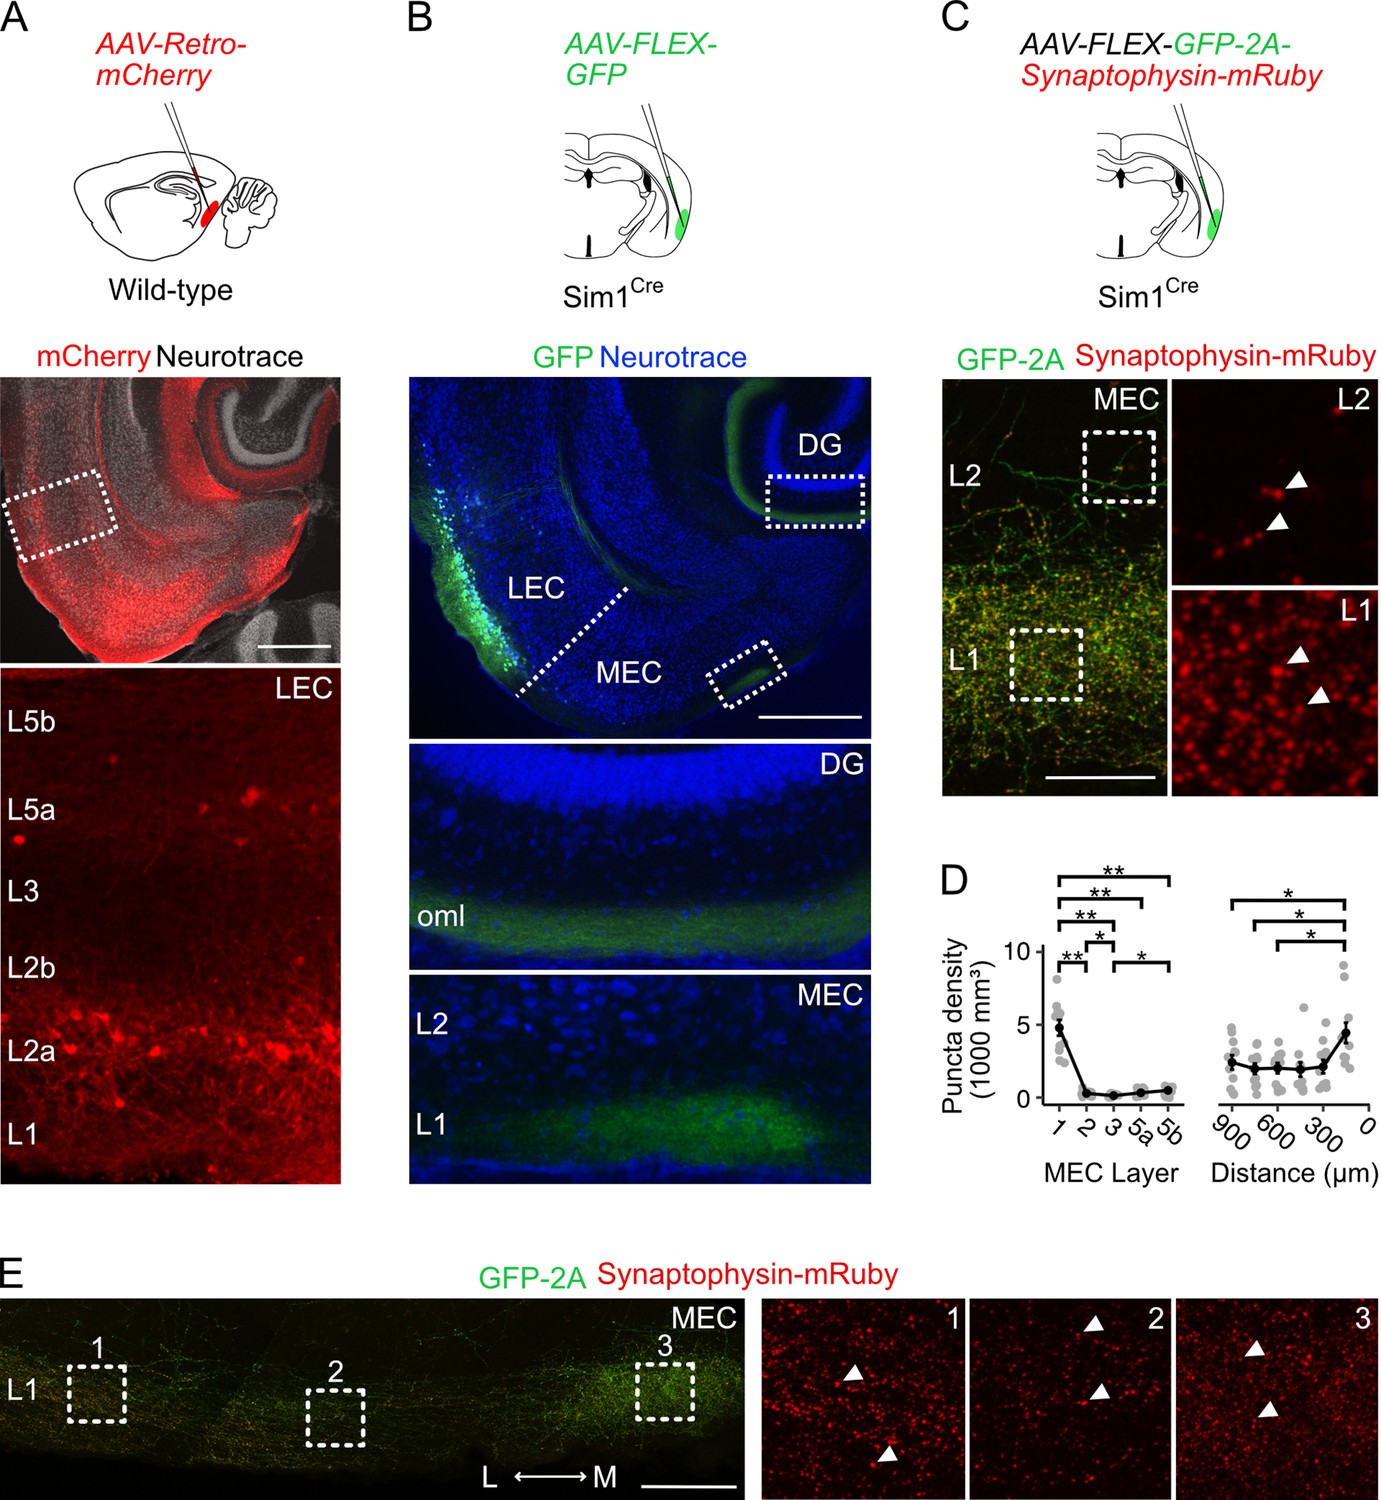 Alice prinsesse Stor eg Fan cells in lateral entorhinal cortex directly influence medial entorhinal  cortex through synaptic connections in layer 1 | eLife